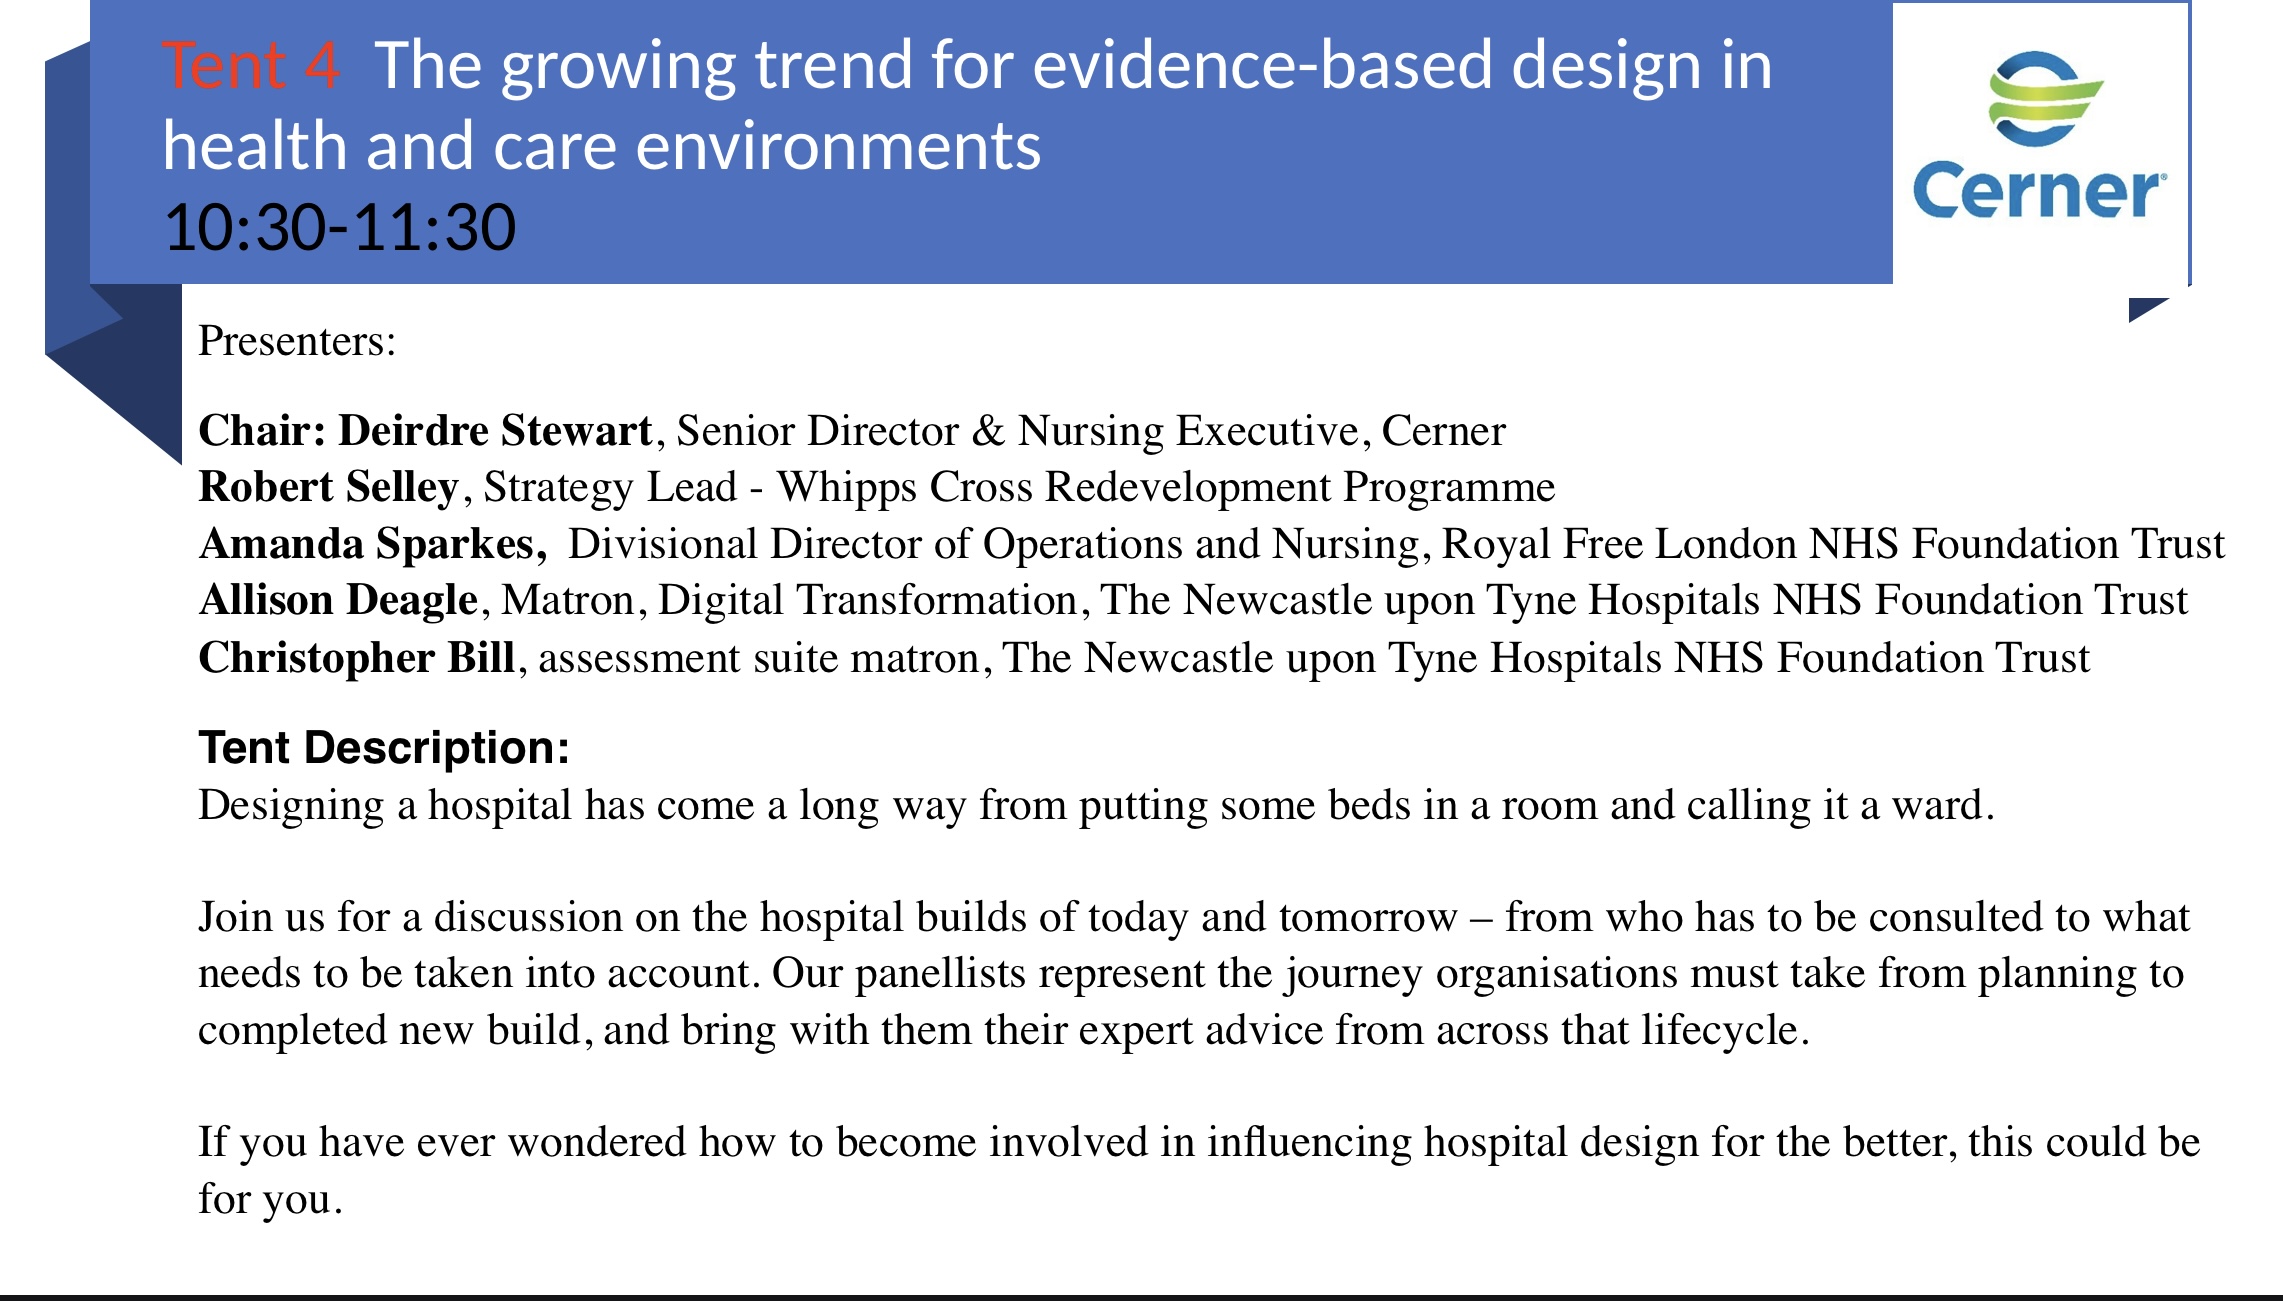 Tent 4 The Growing trend for evidence-based design in health and care environments - Cerner UK featured image